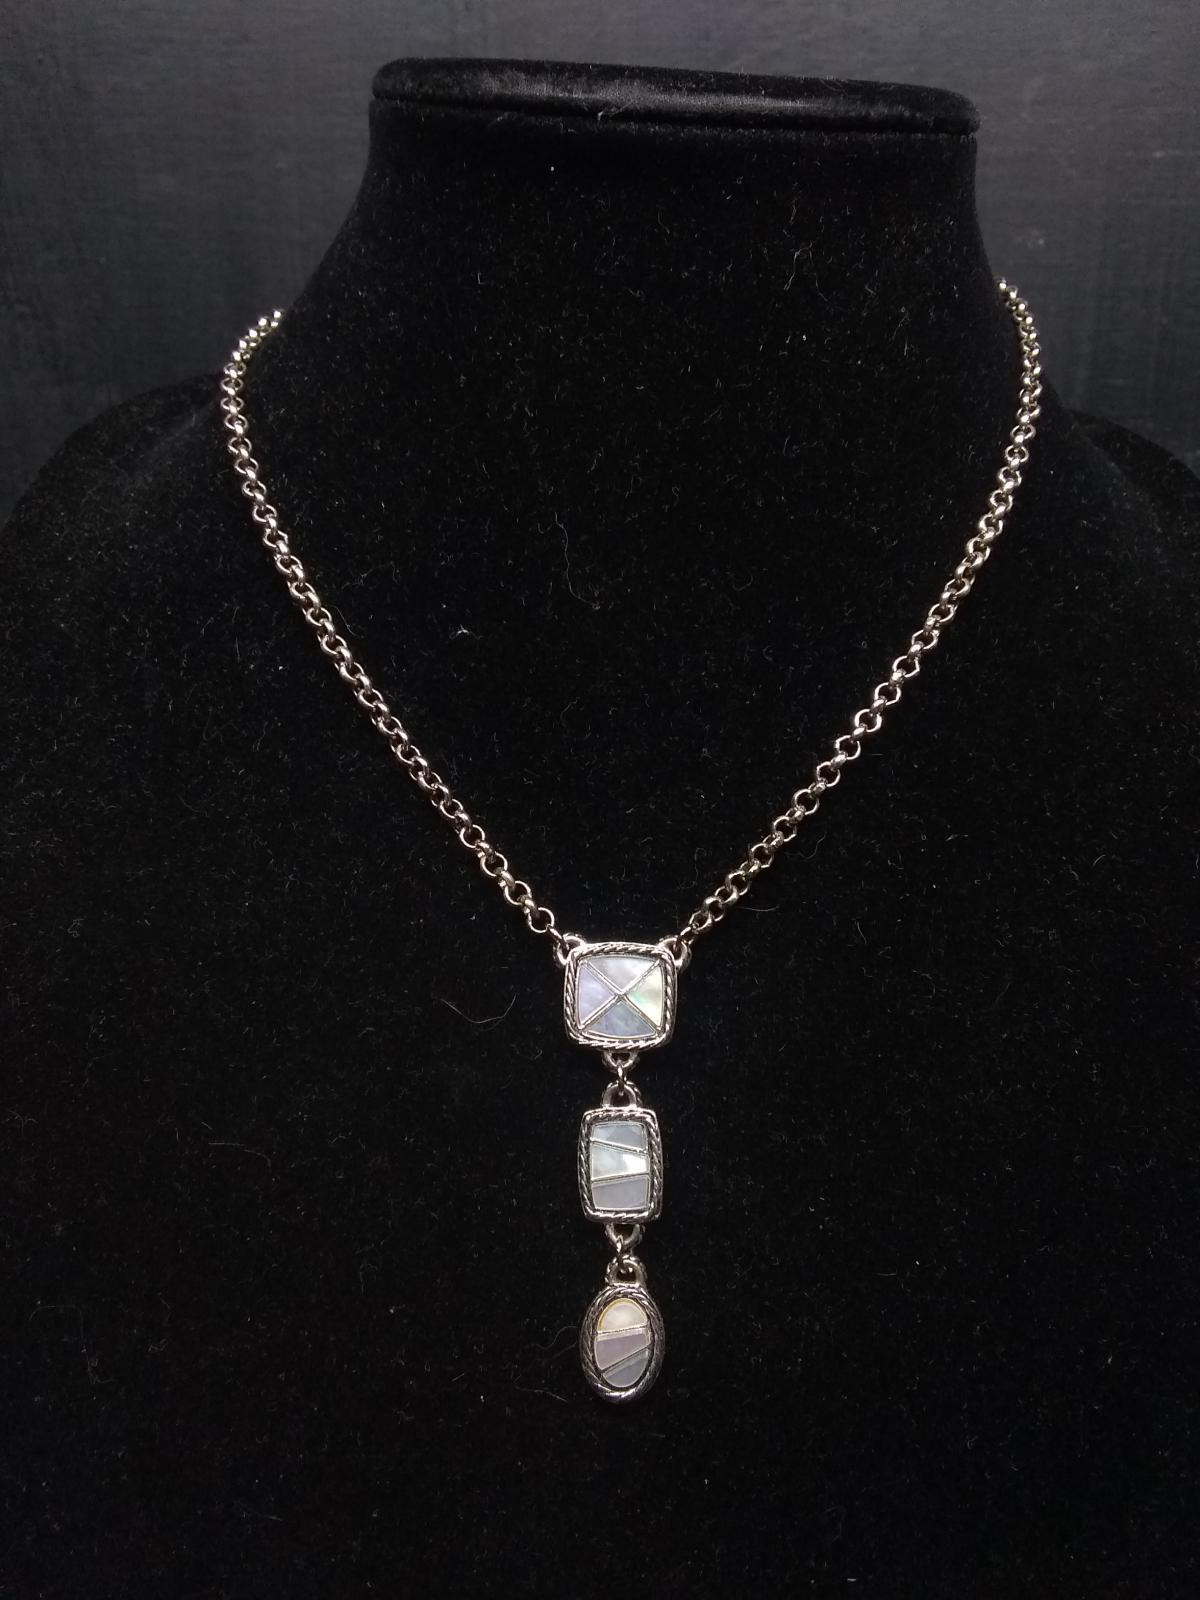 Costume Jewelry-Necklace with 3 Section Polished Stone Pendant